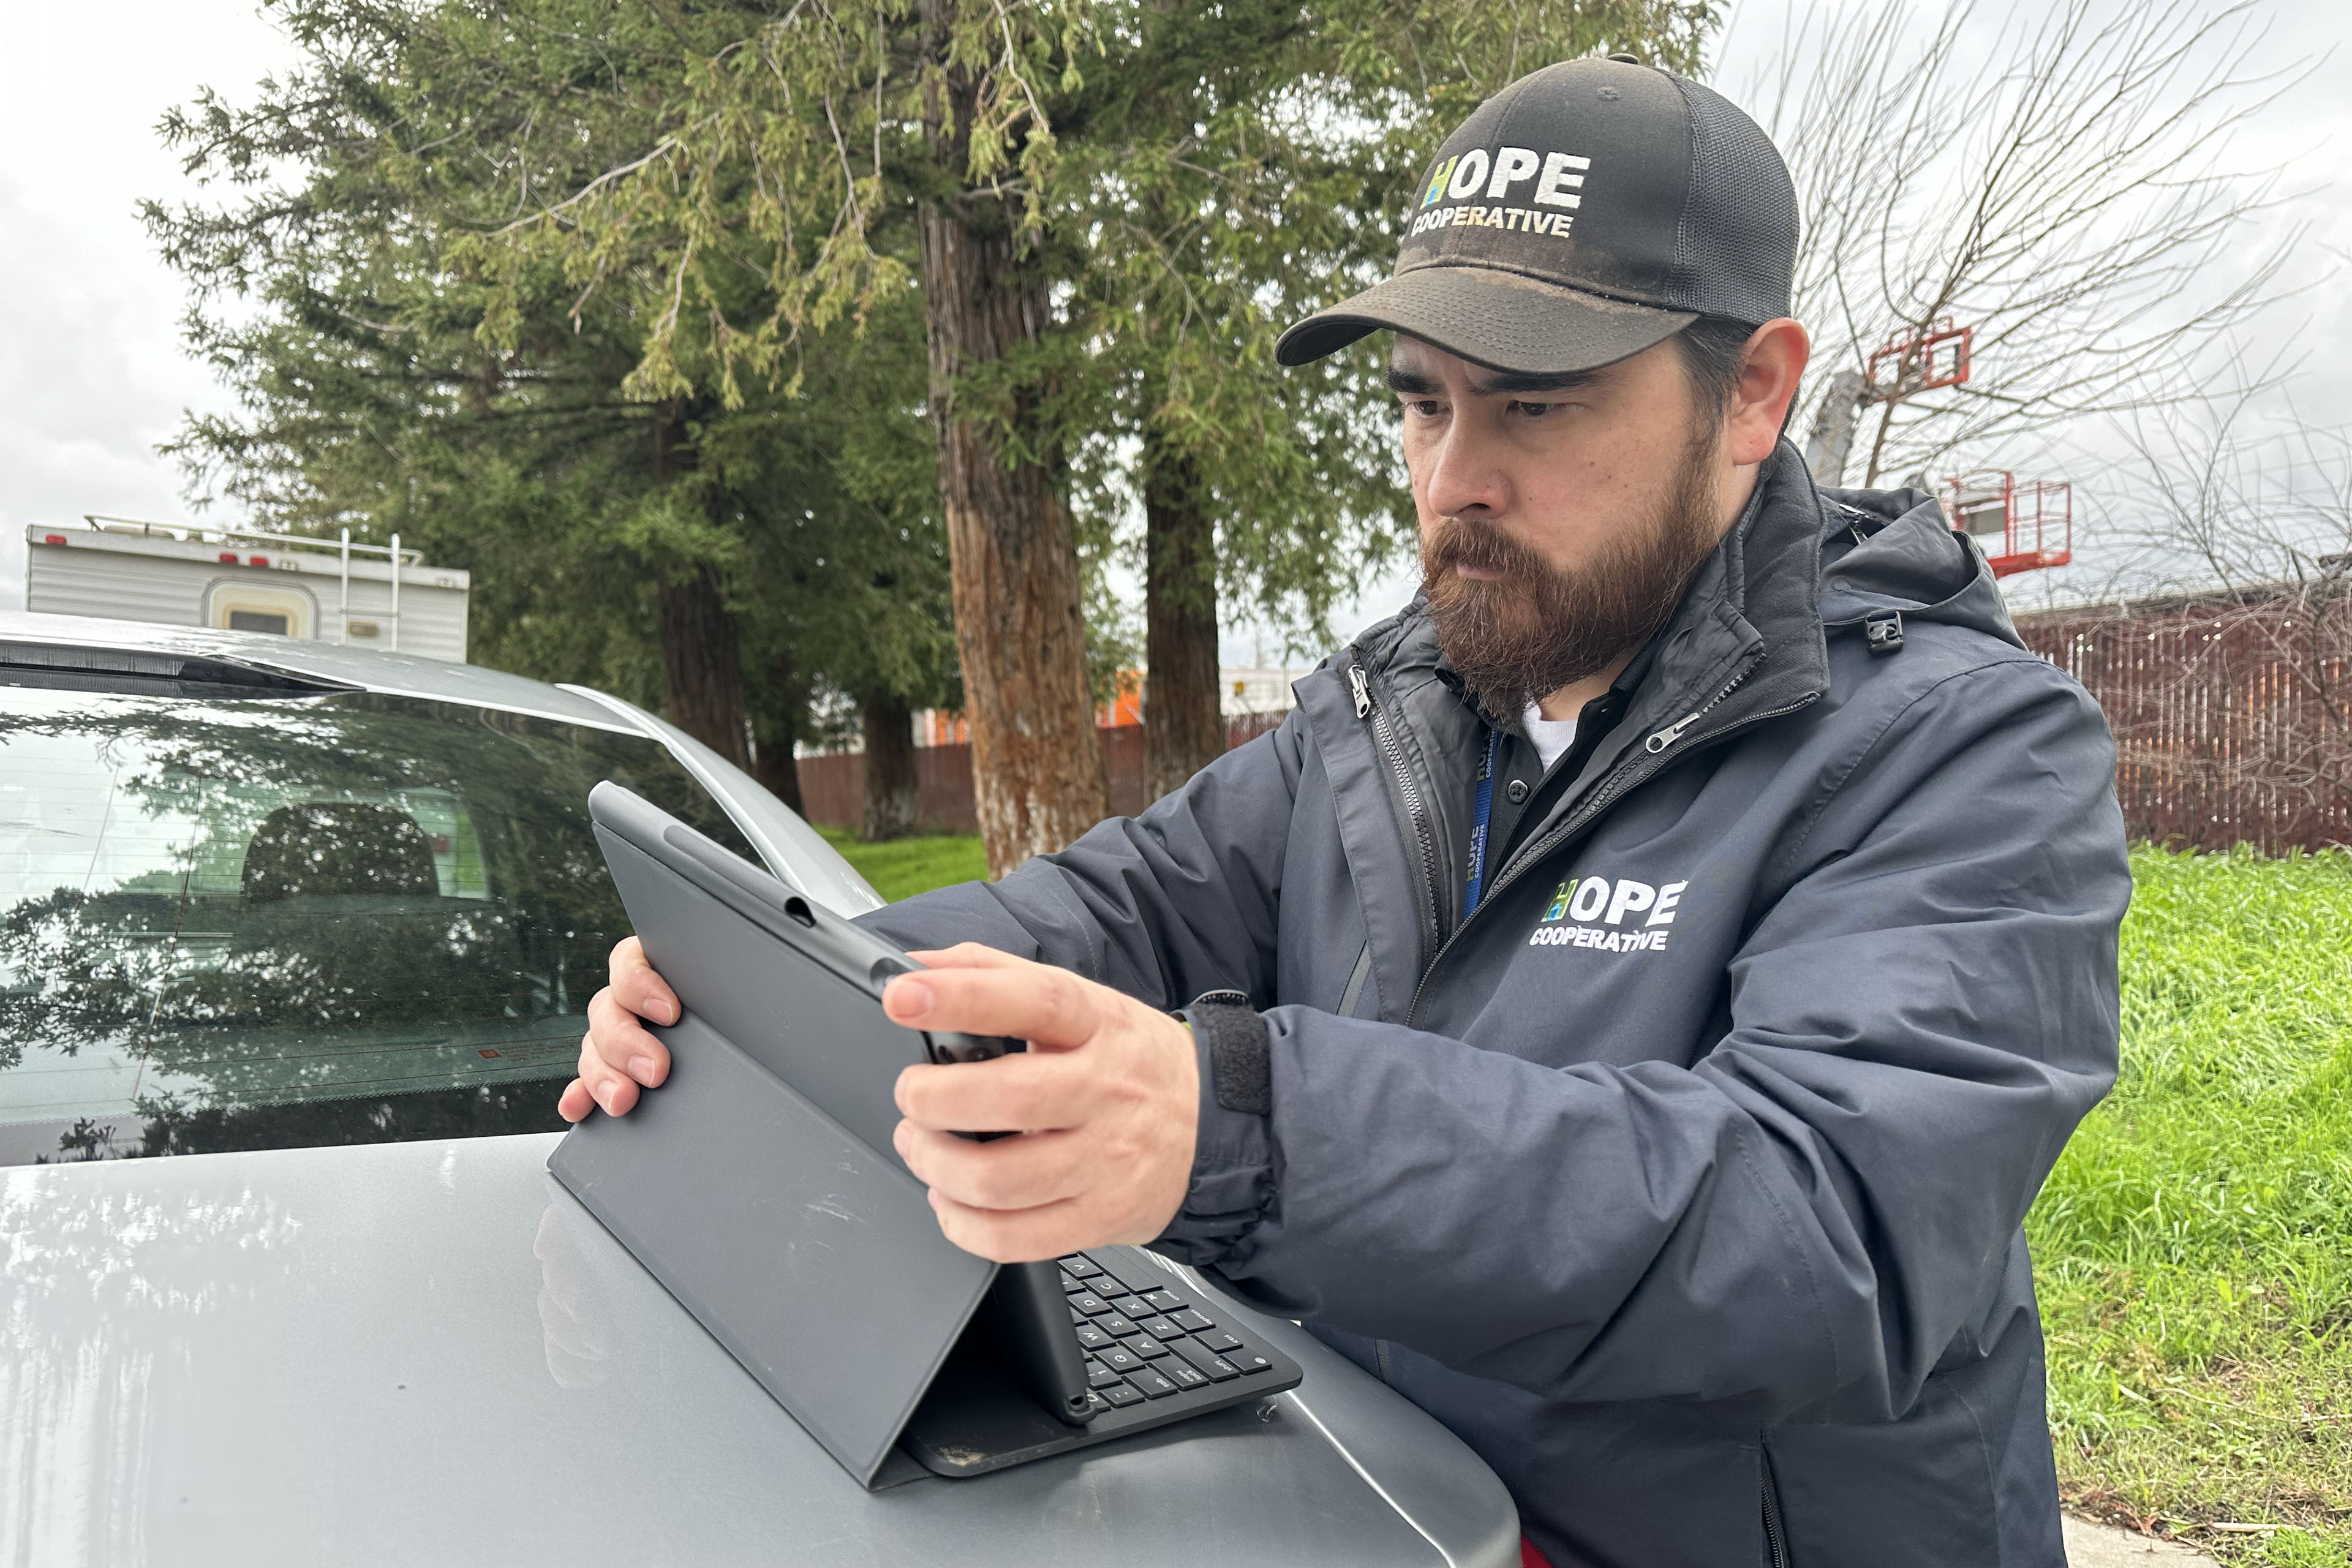 Greg Stupplebeen works on a tablet that is propped up on the back of a car.